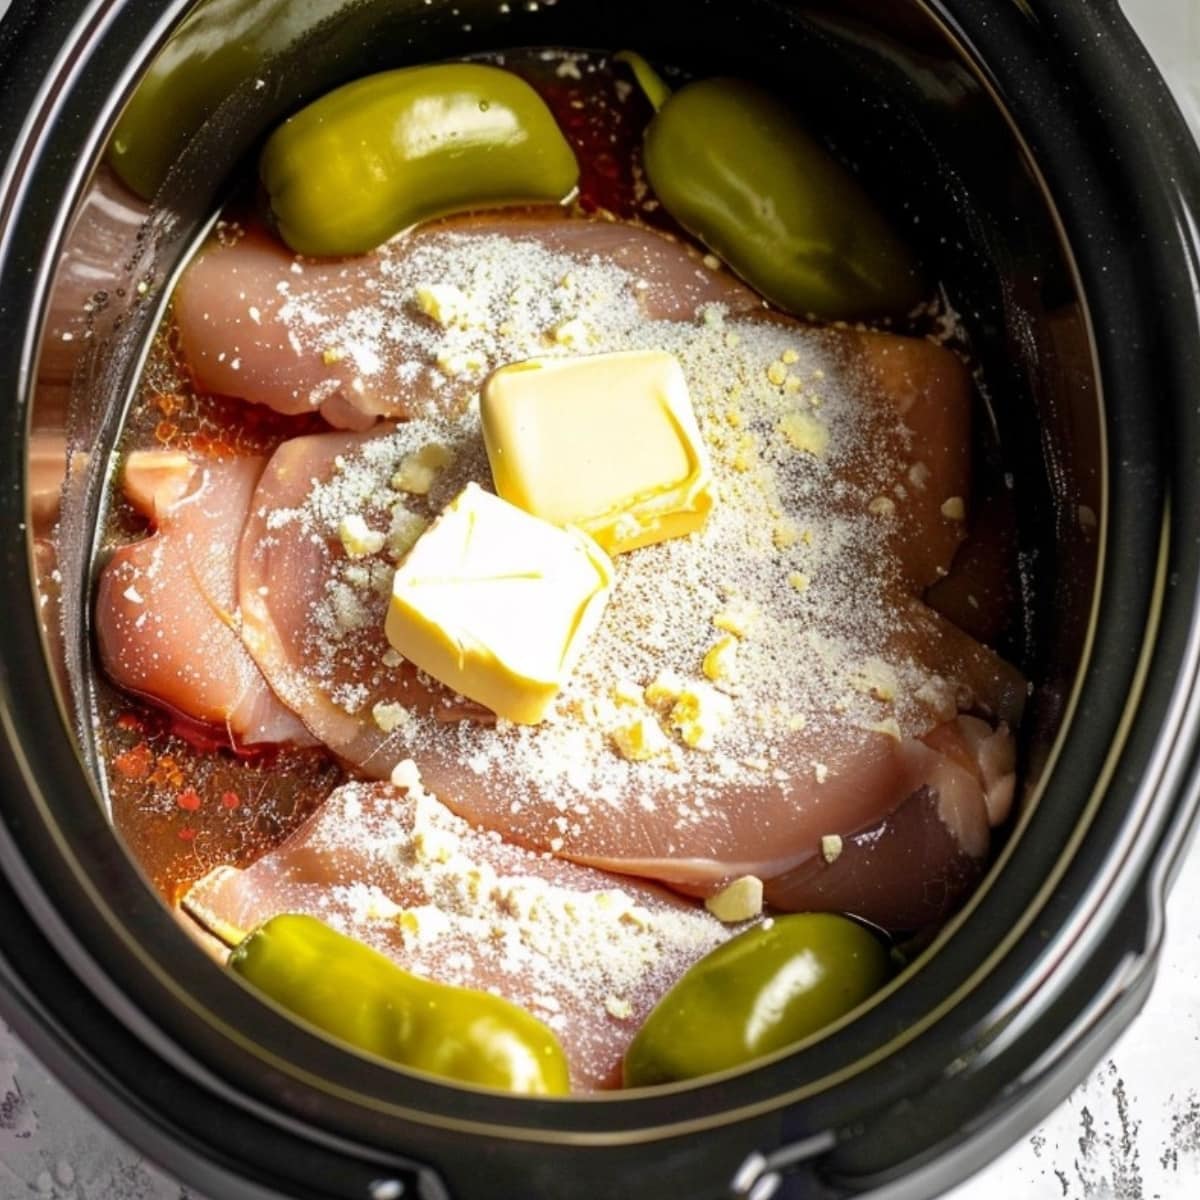 Skinless chicken breast with pepperoncini peppers, butter and gravy inside a slow cooker.